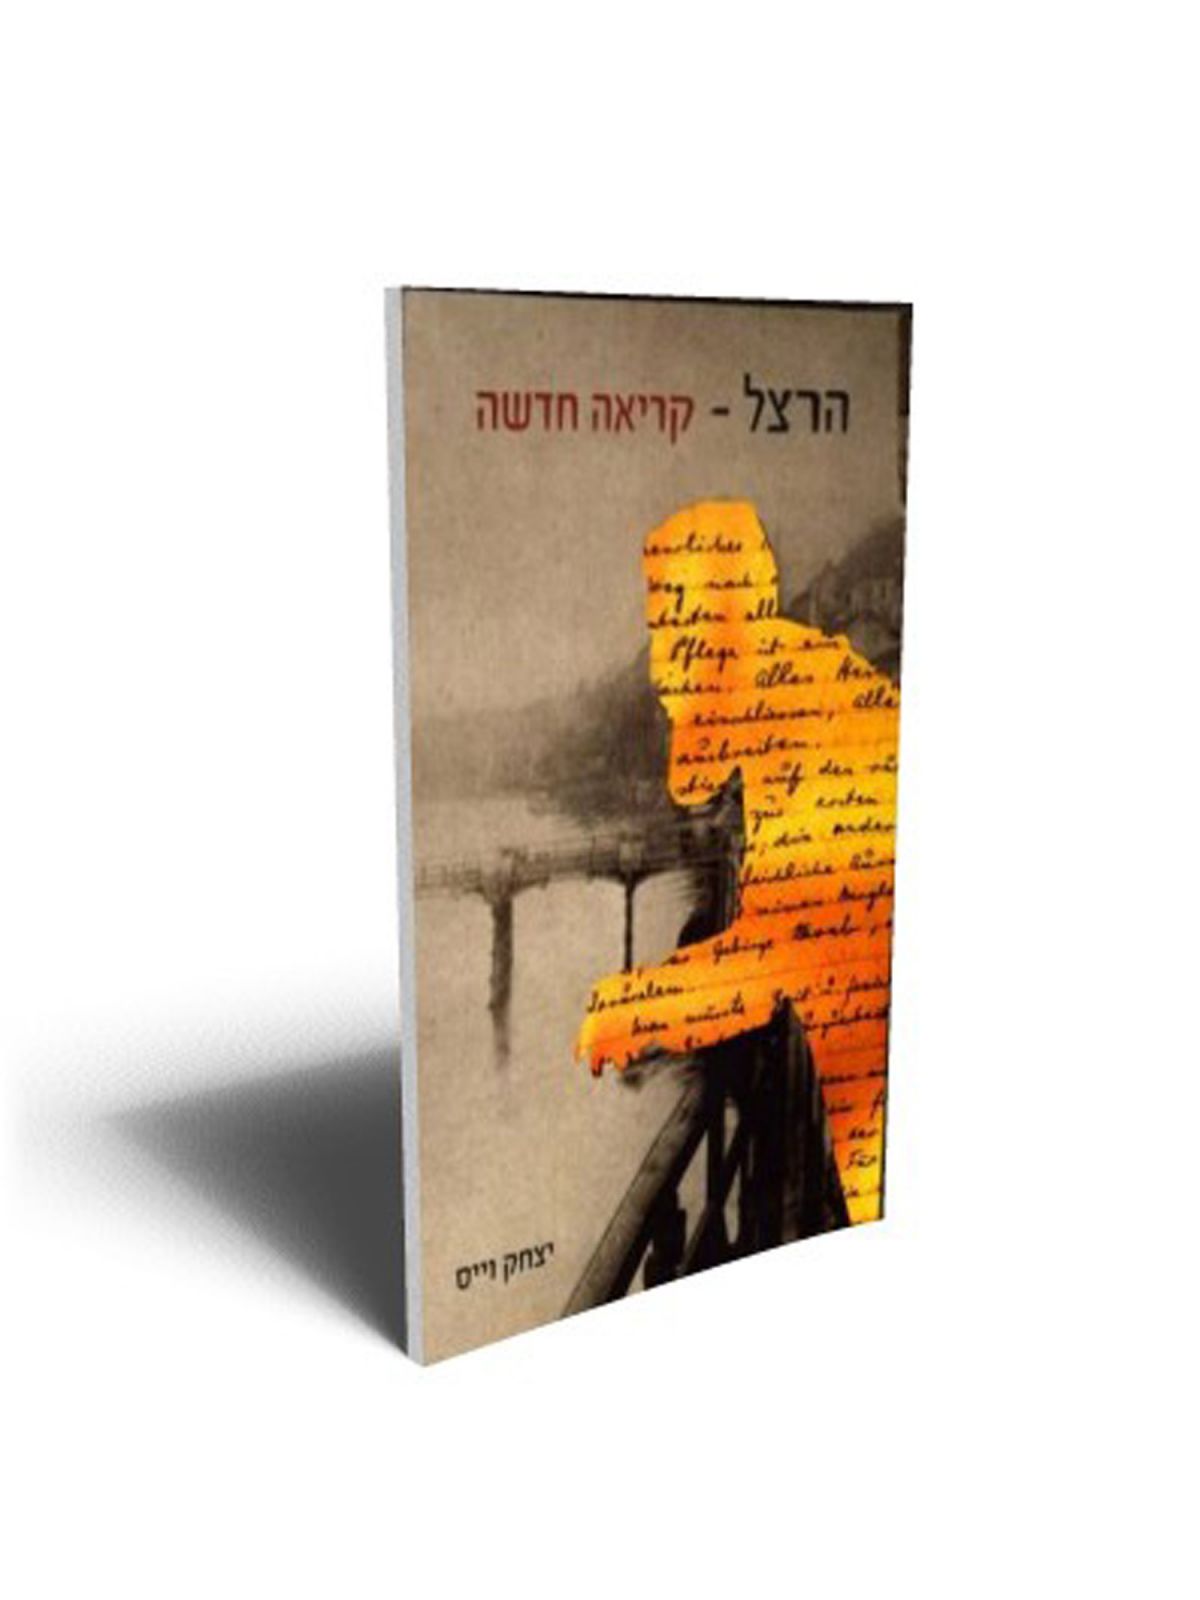 HERZL - A NEW READING